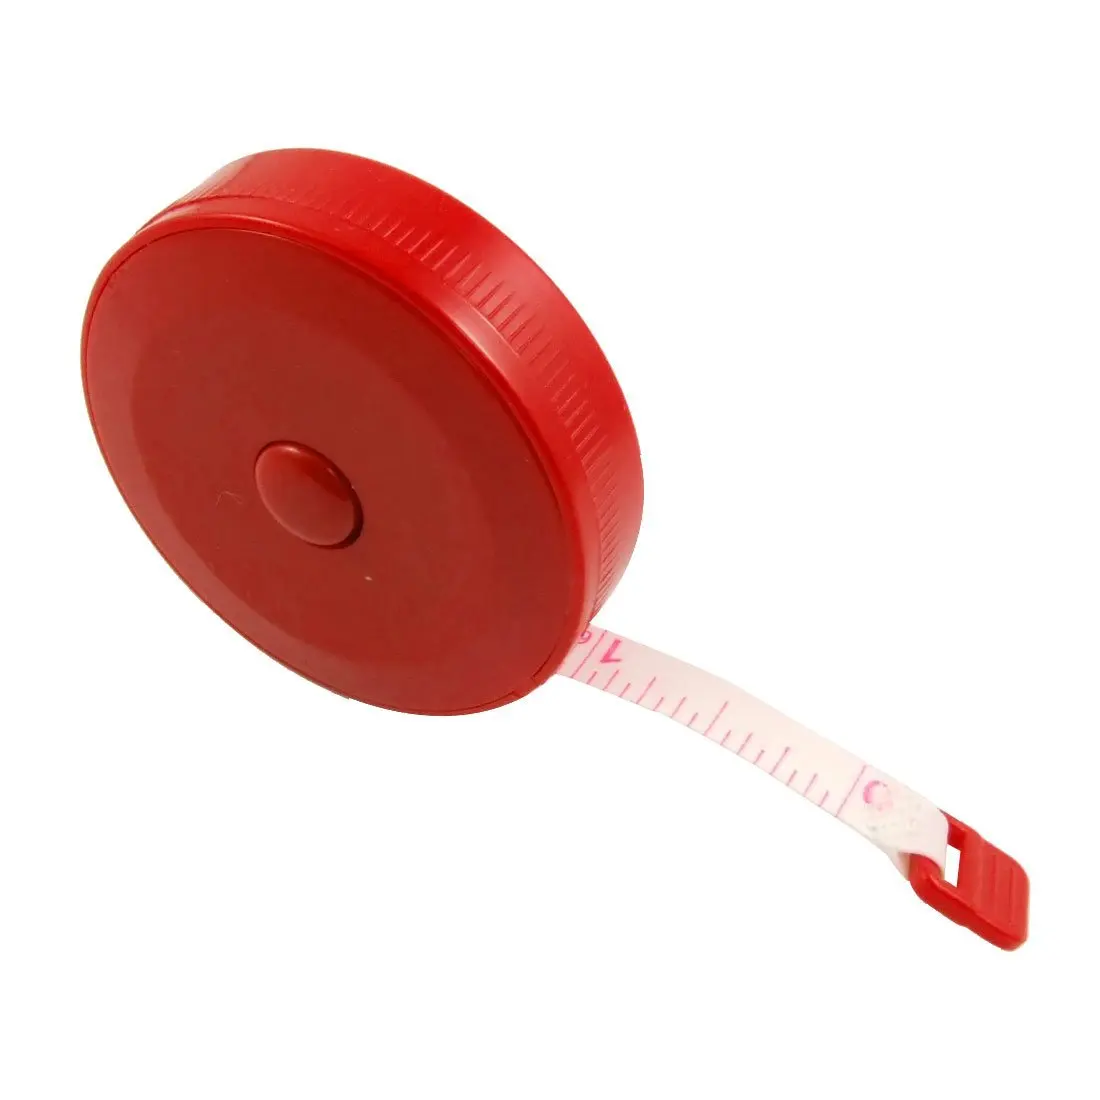 

Hot sale Tailor Sewing Retractable Ruler Tape Measure Red 1.5M/60"